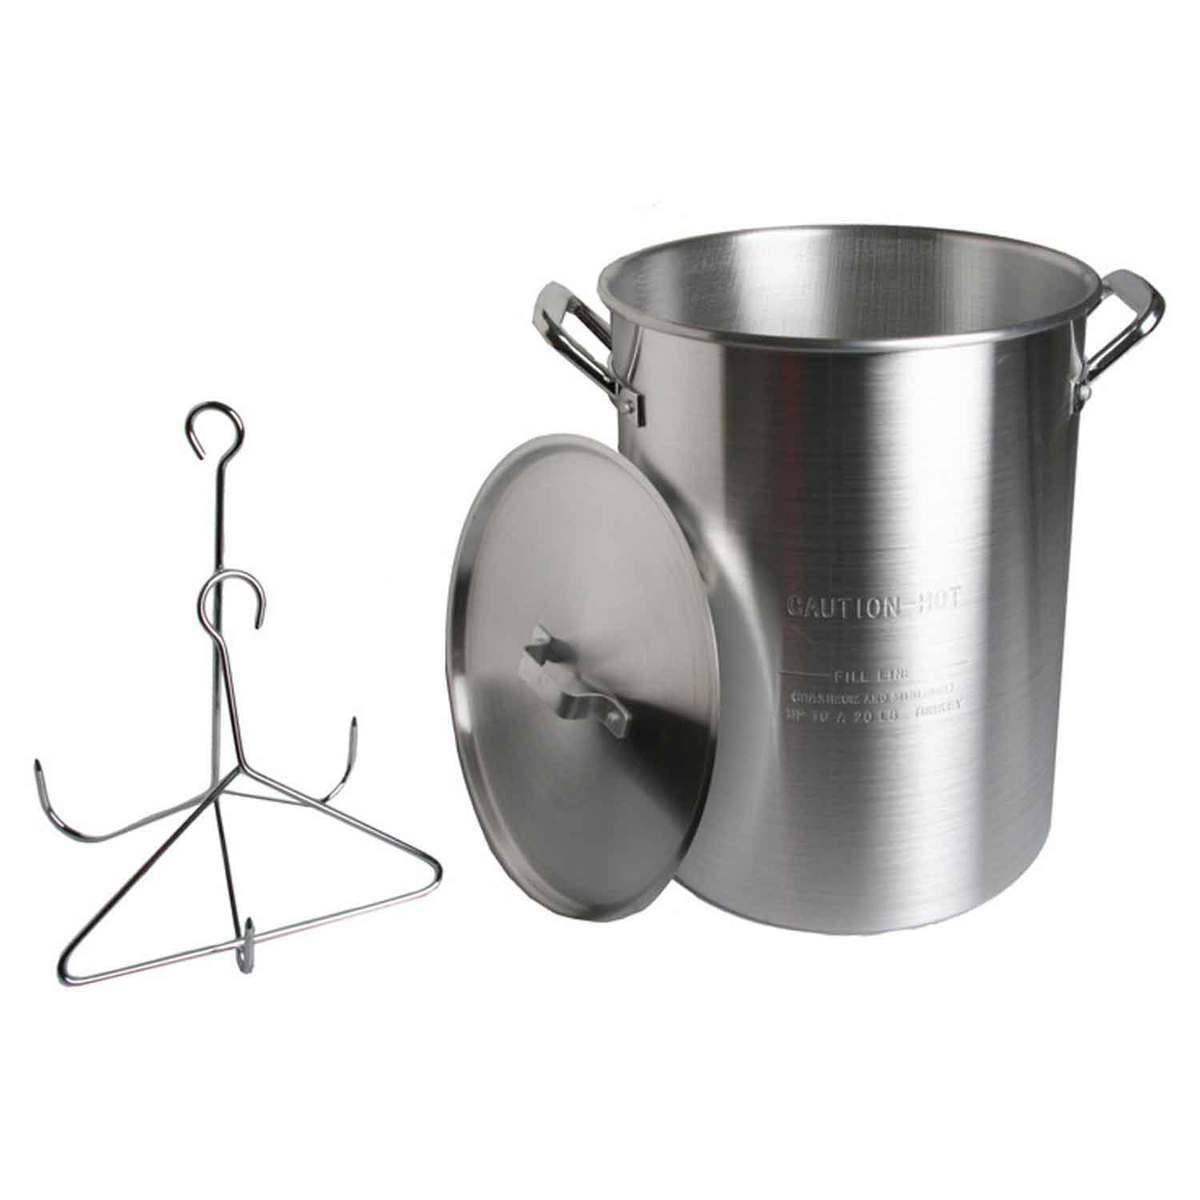 King Kooker 30 qt. Stainless Steel Turkey Pot with Lid Lifting